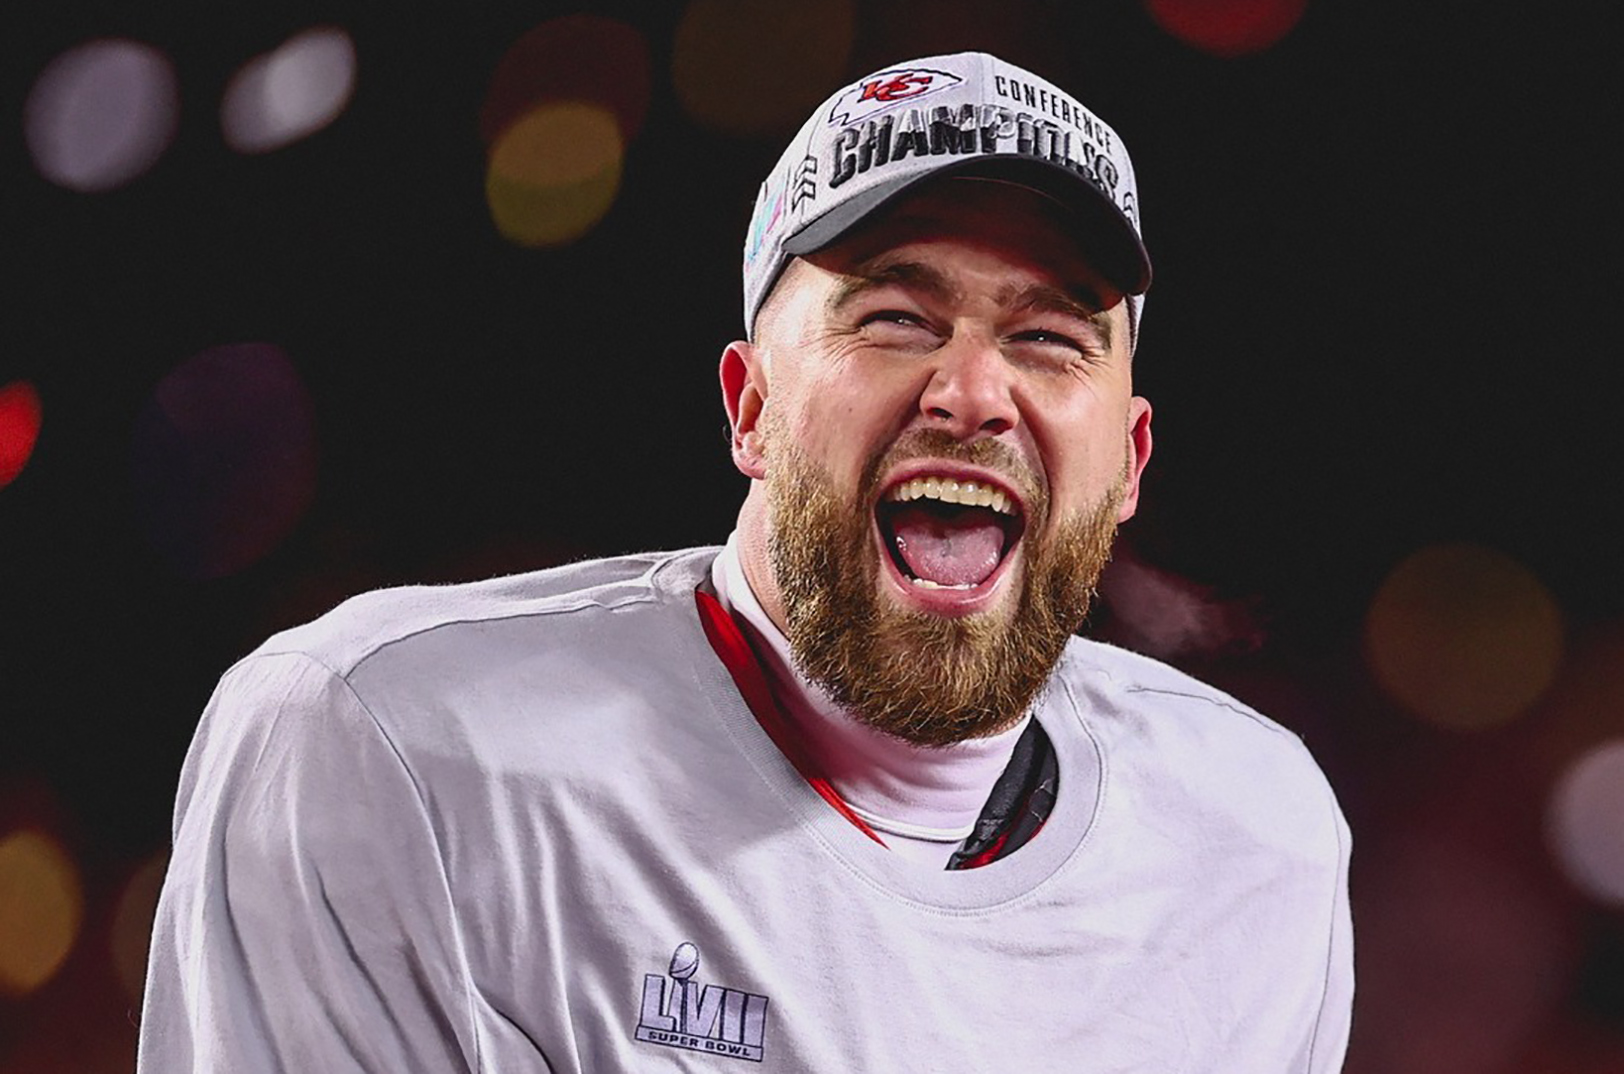 Travis Kelce’s Super Bowl catchphrases score big for KC merch makers, driving business into the end zone